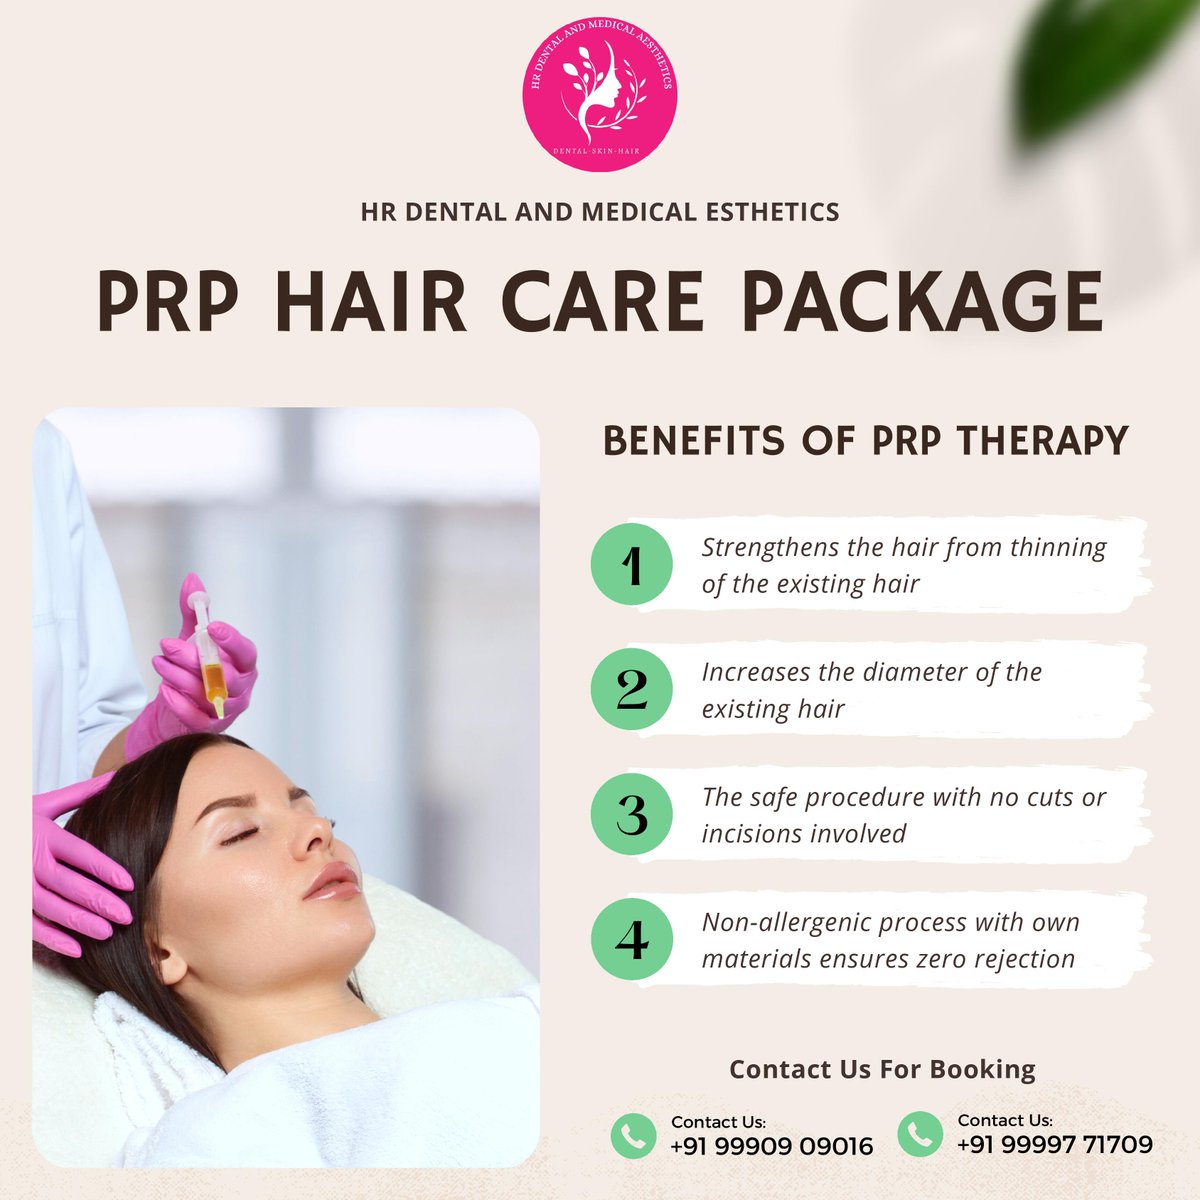 Get ready to transform your hair with the PRP Hair Care Package by Hr Dental And Medical Aesthetics! For bookings, call Dr. Himani Bhardwaj at 9999771709 or visit our clinic at SB 34, Shashtri Nagar, Ghaziabad.
#PRPHairCare #HairTransformation #HrDentalAndMedicalAesthetics #prp